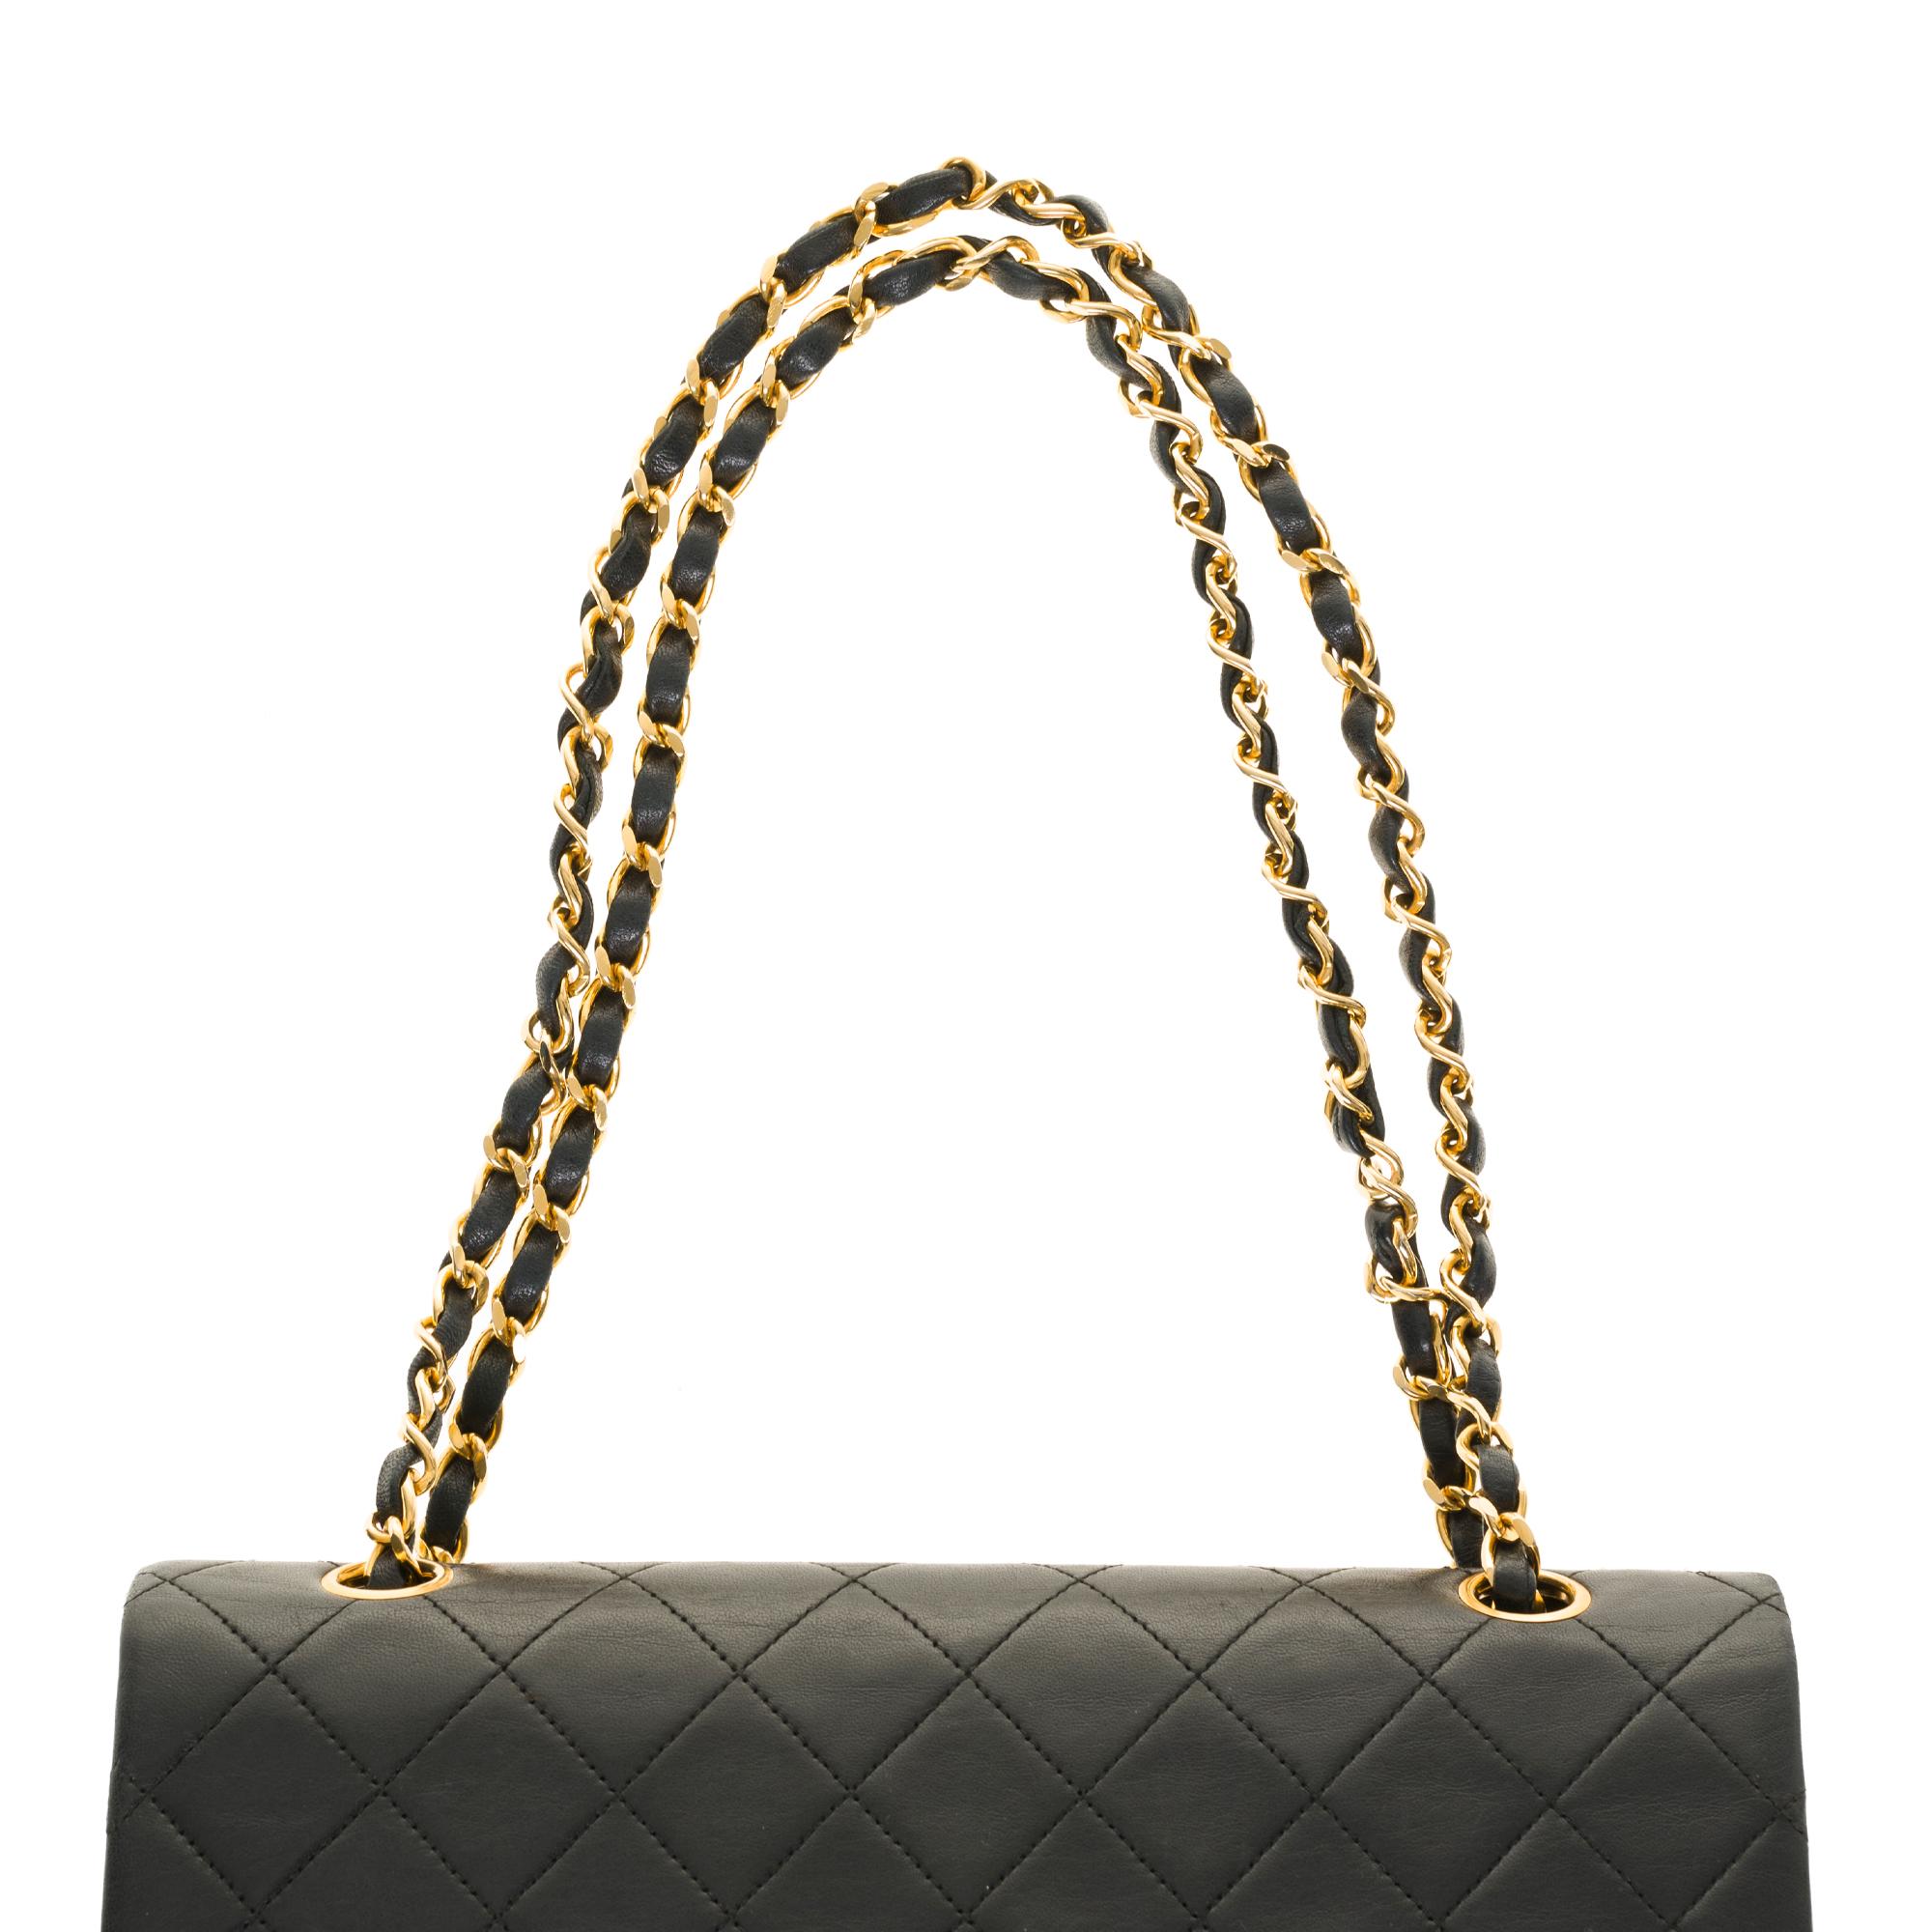 The Classy Chanel Timeless Medium Shoulder bag in black quilted lambskin and GHW 3